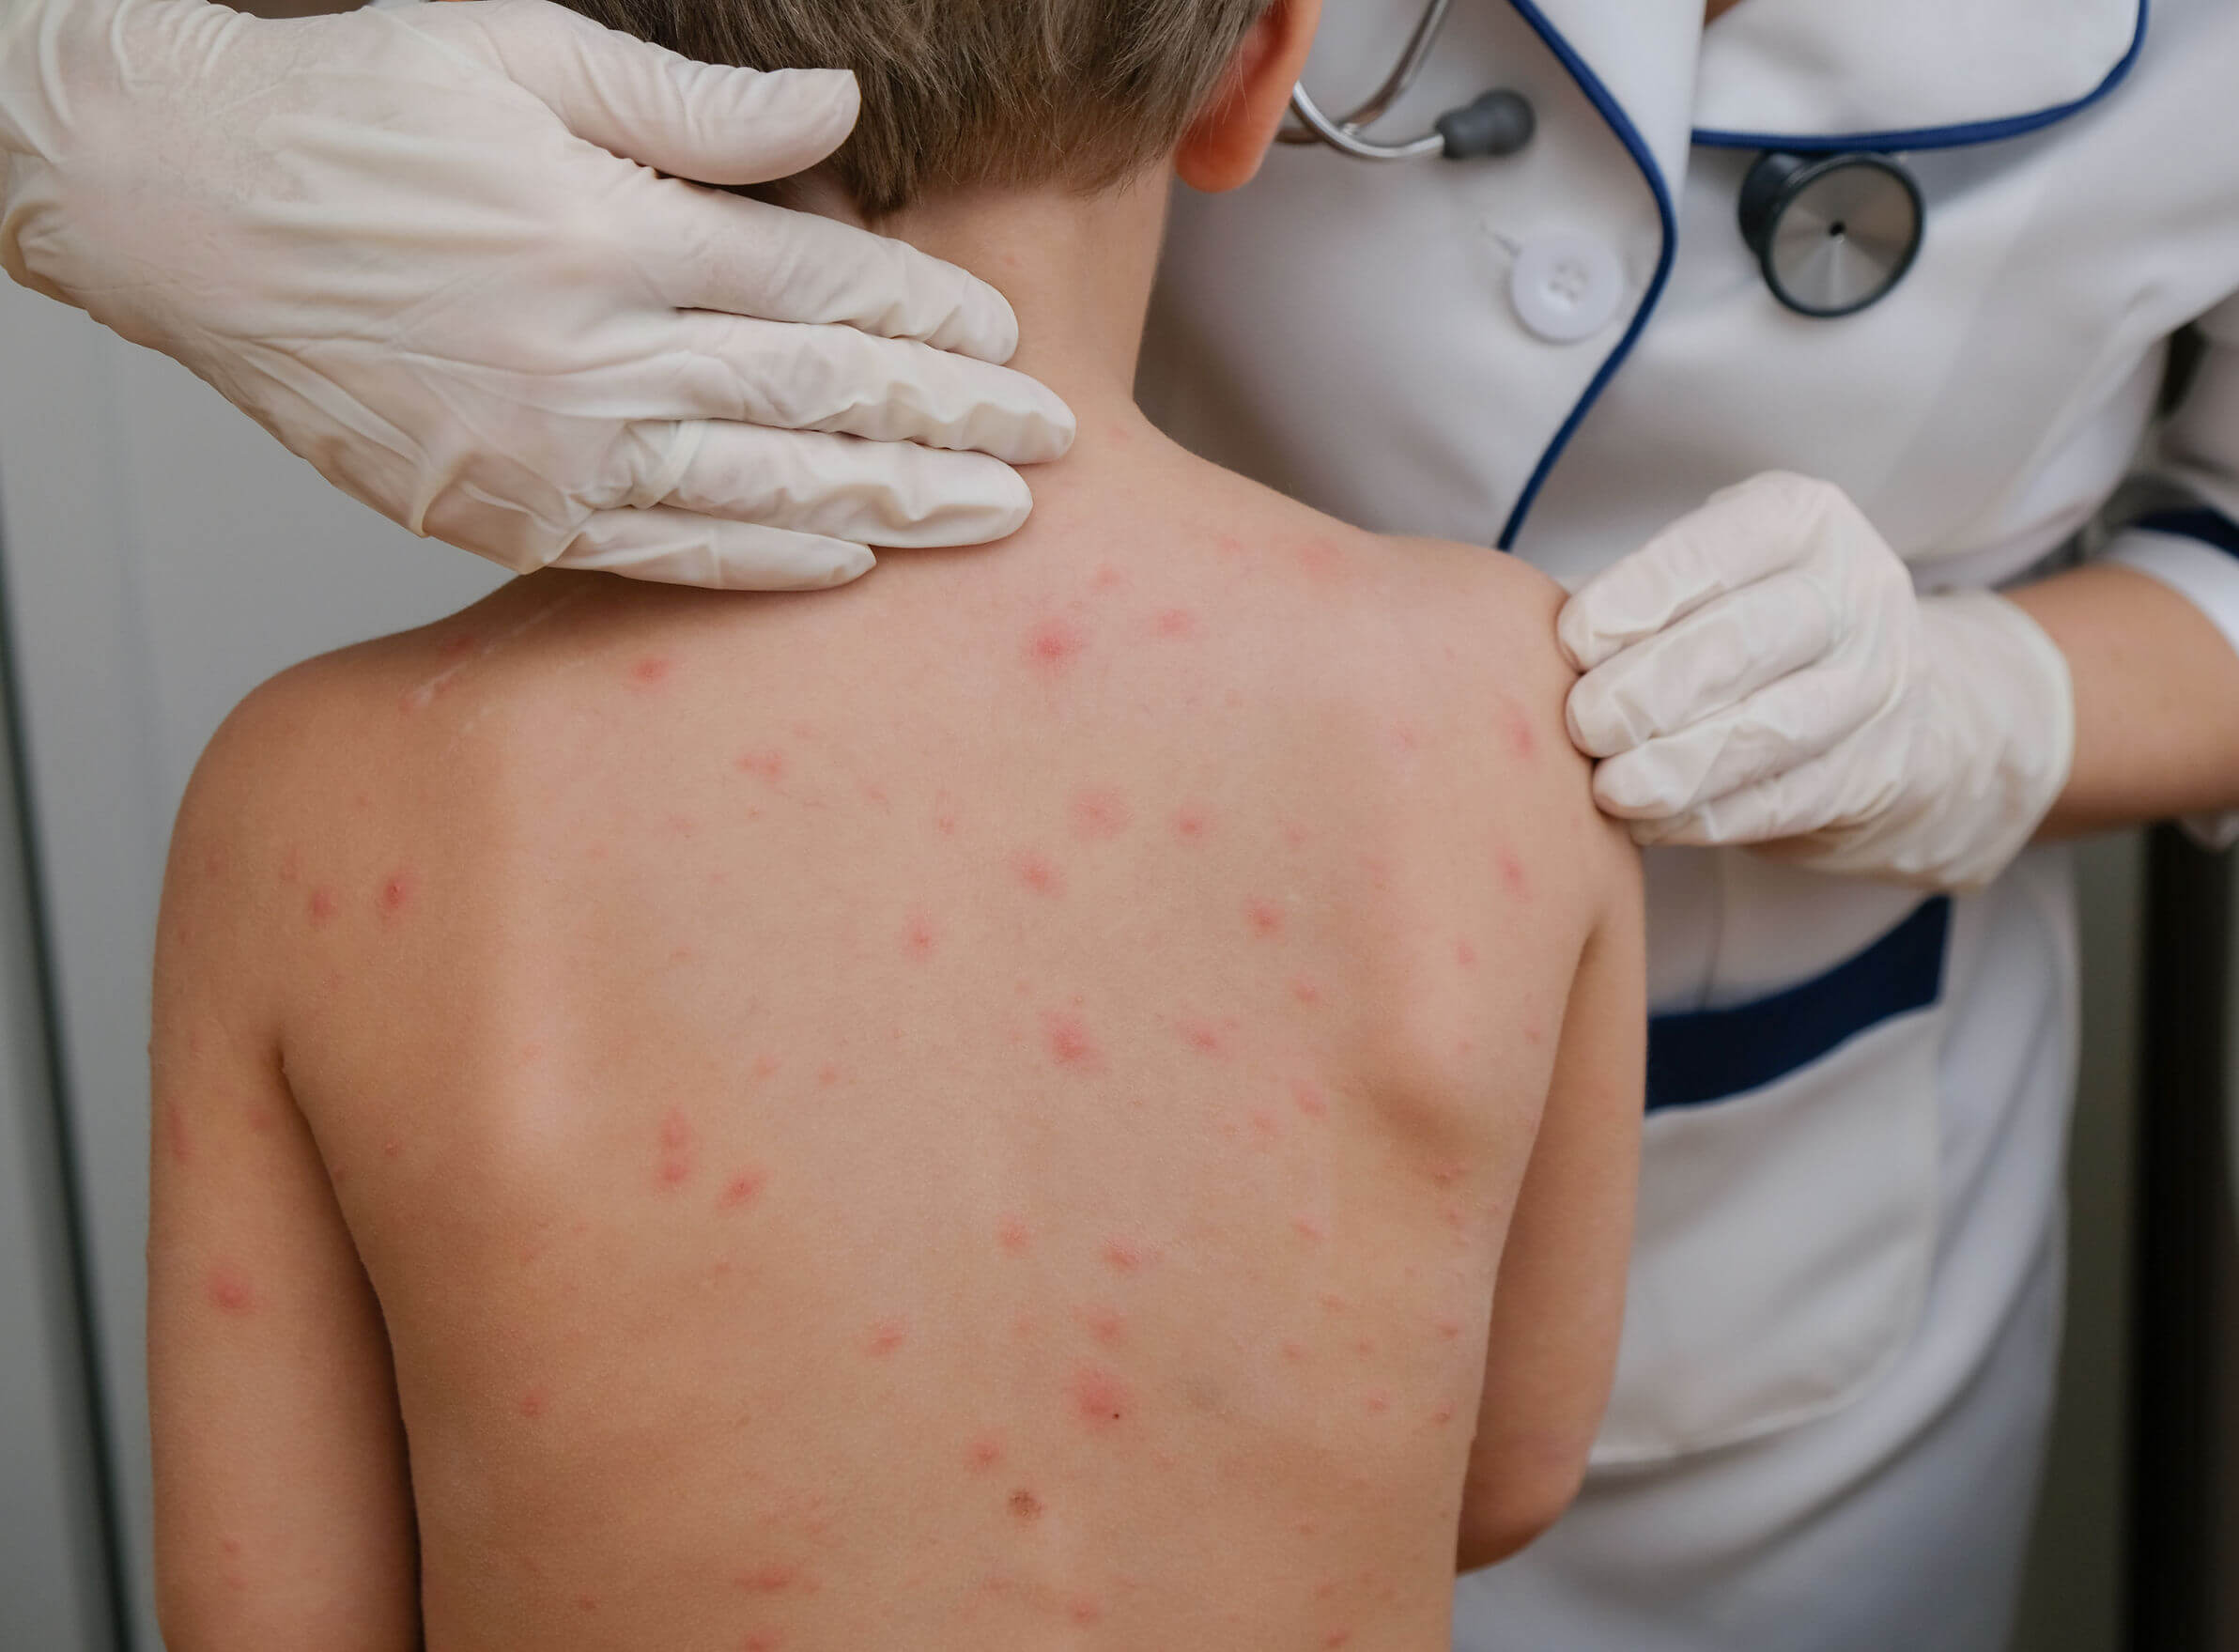 Red spots on the skin are common in children.